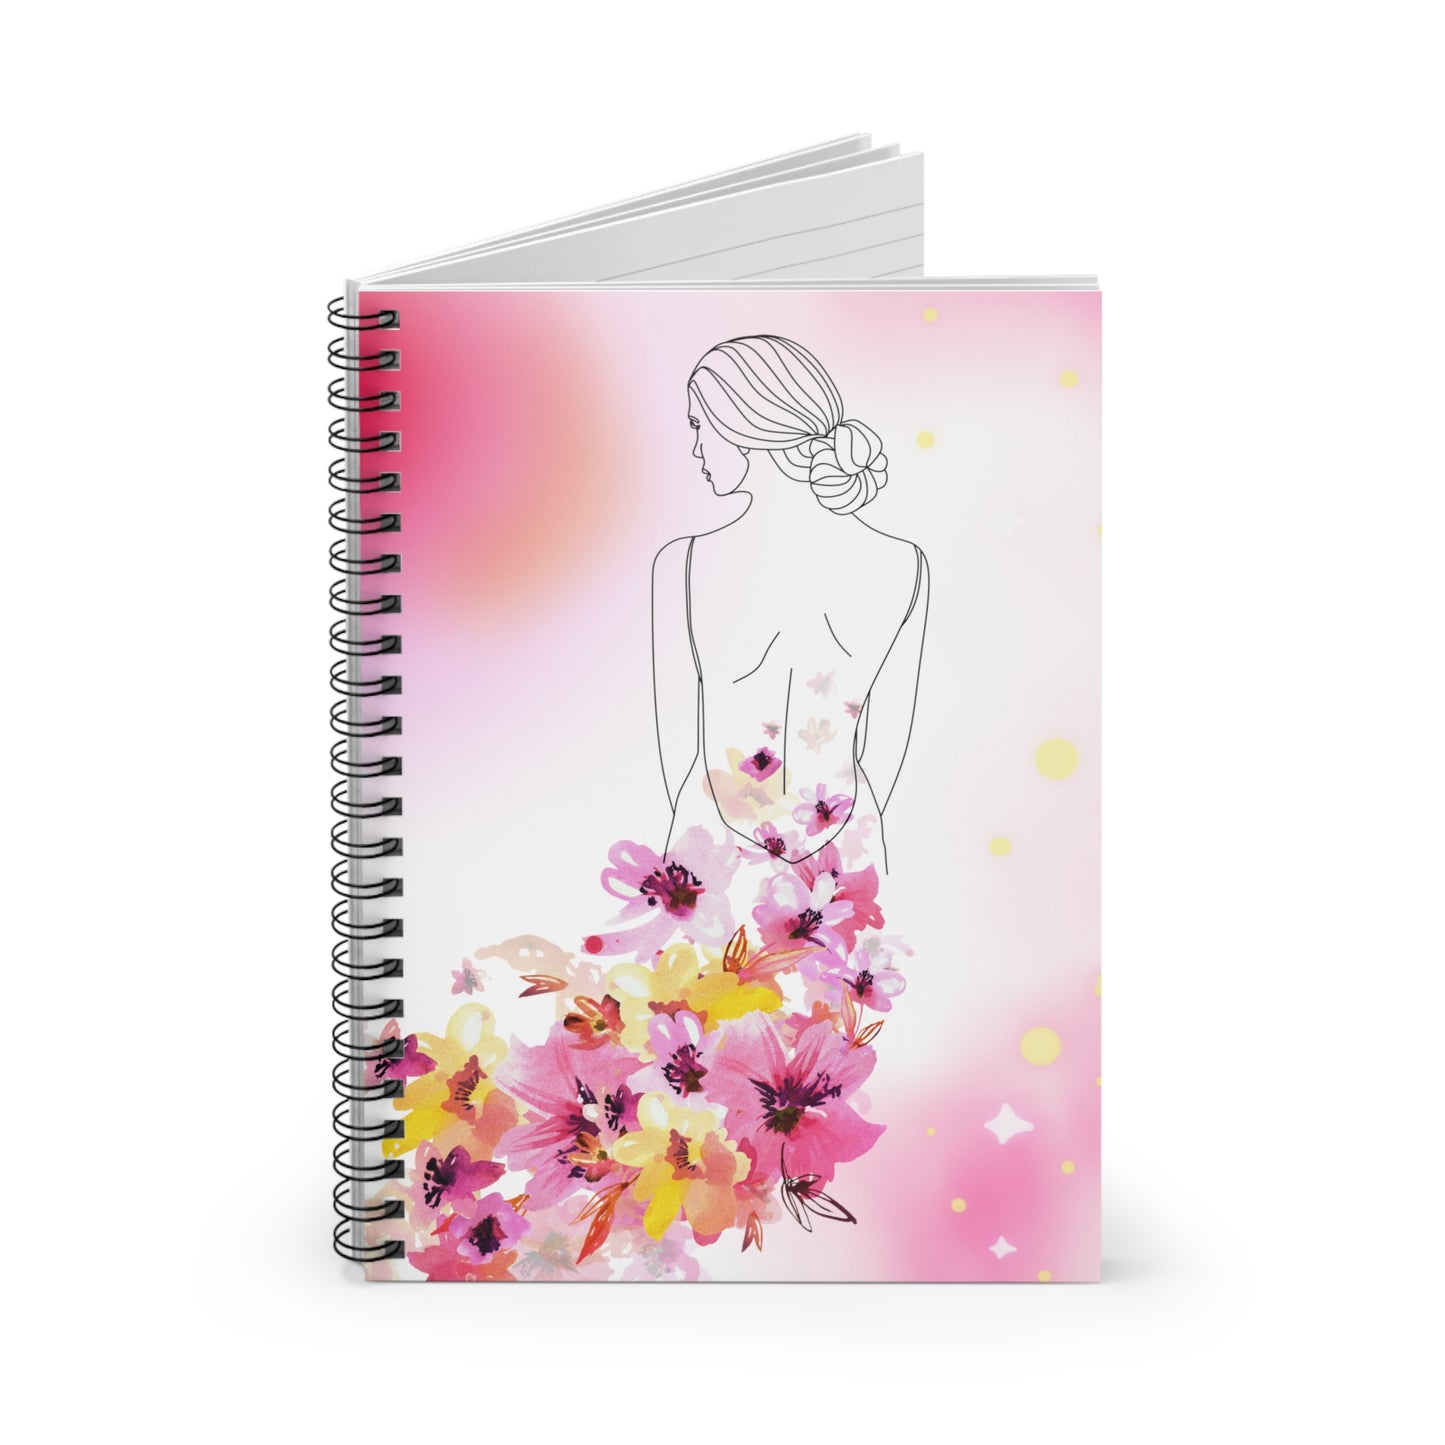 Mother Nature: Spiral Notebook - Log Books - Journals - Diaries - and More Custom Printed by TheGlassyLass